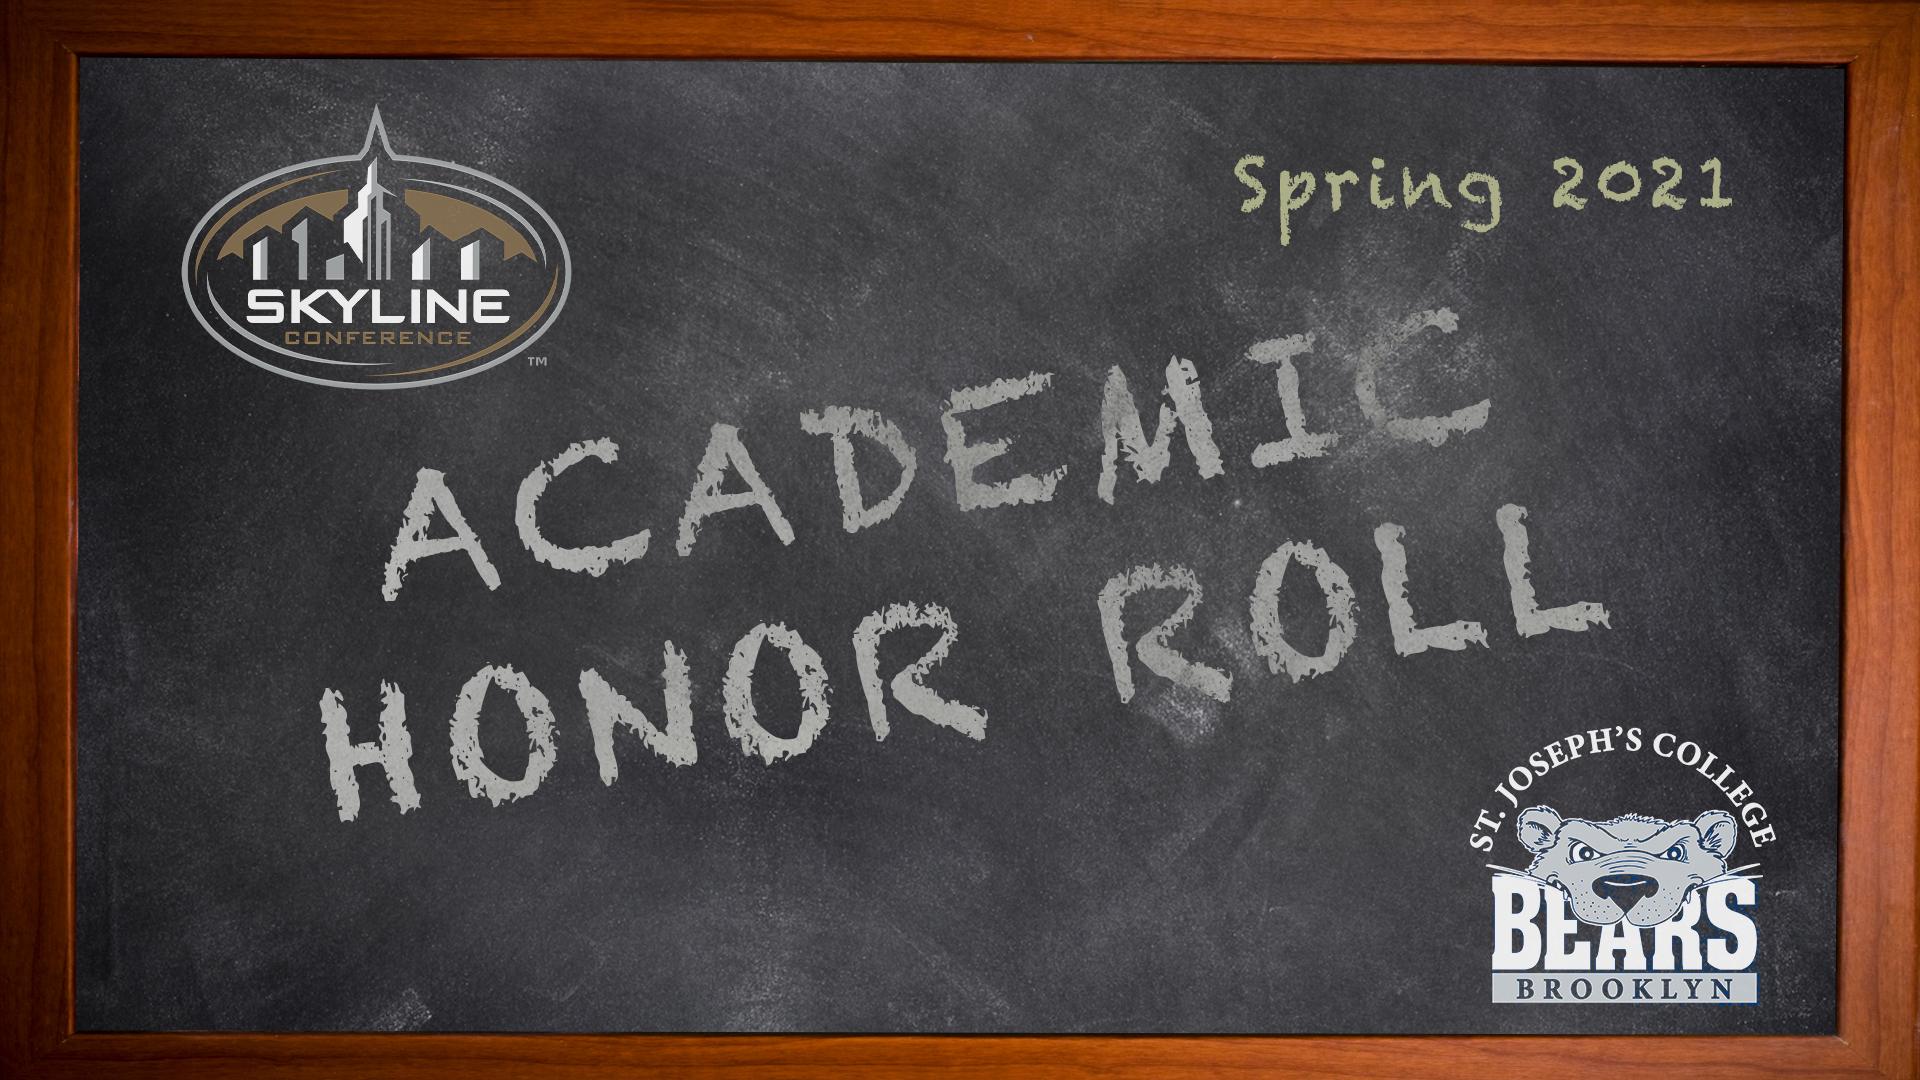 Thirty-Seven Land on Spring 2021 Skyline Academic Honor Roll